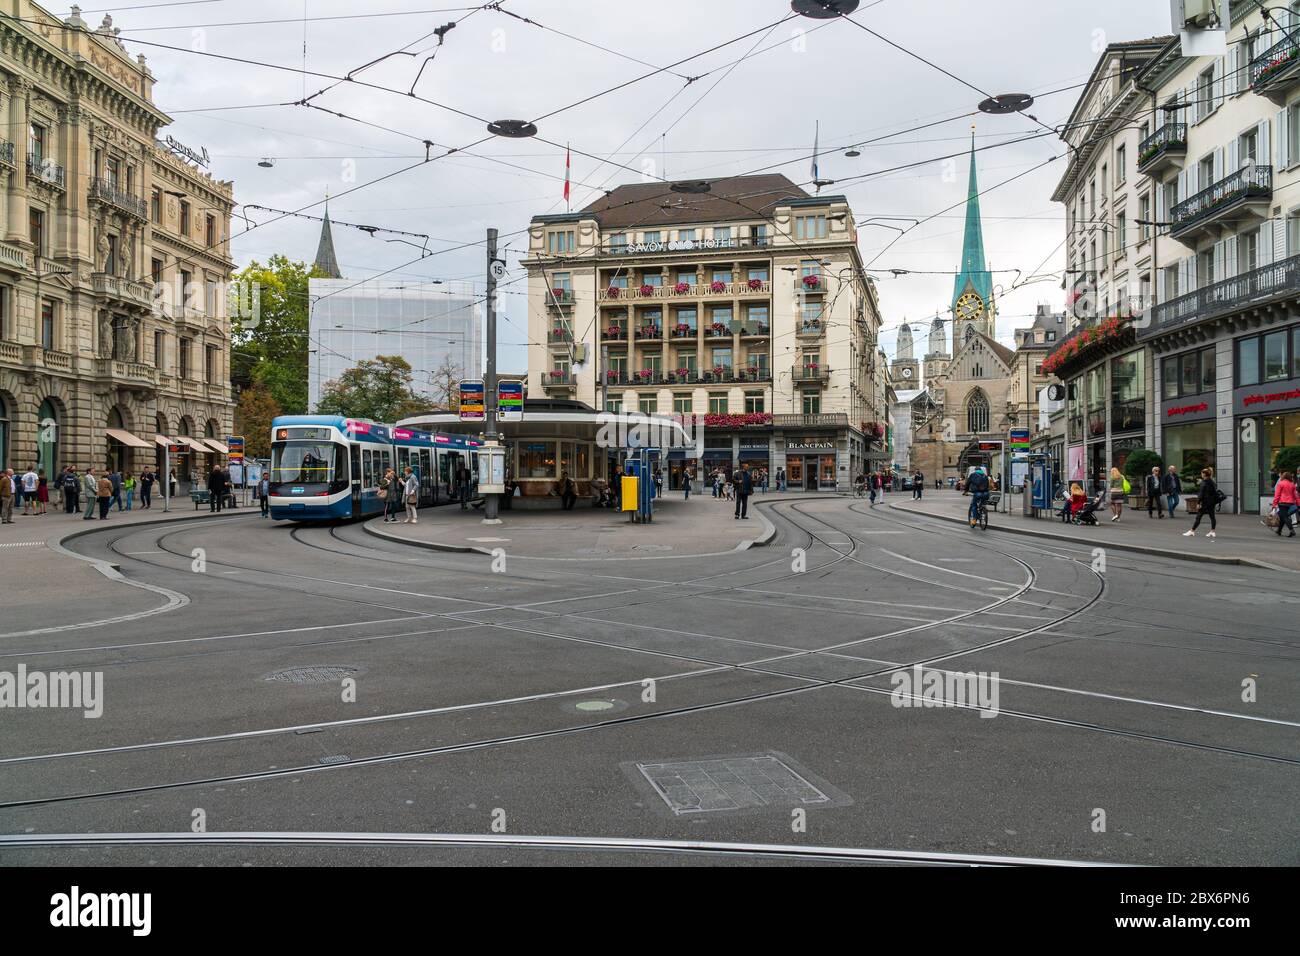 Zurich, Switzerland - October 6, 2018: People visiting the Paradeplatz square with its famous tram station, Savoy Hotel and a view to Fraumünster Stock Photo